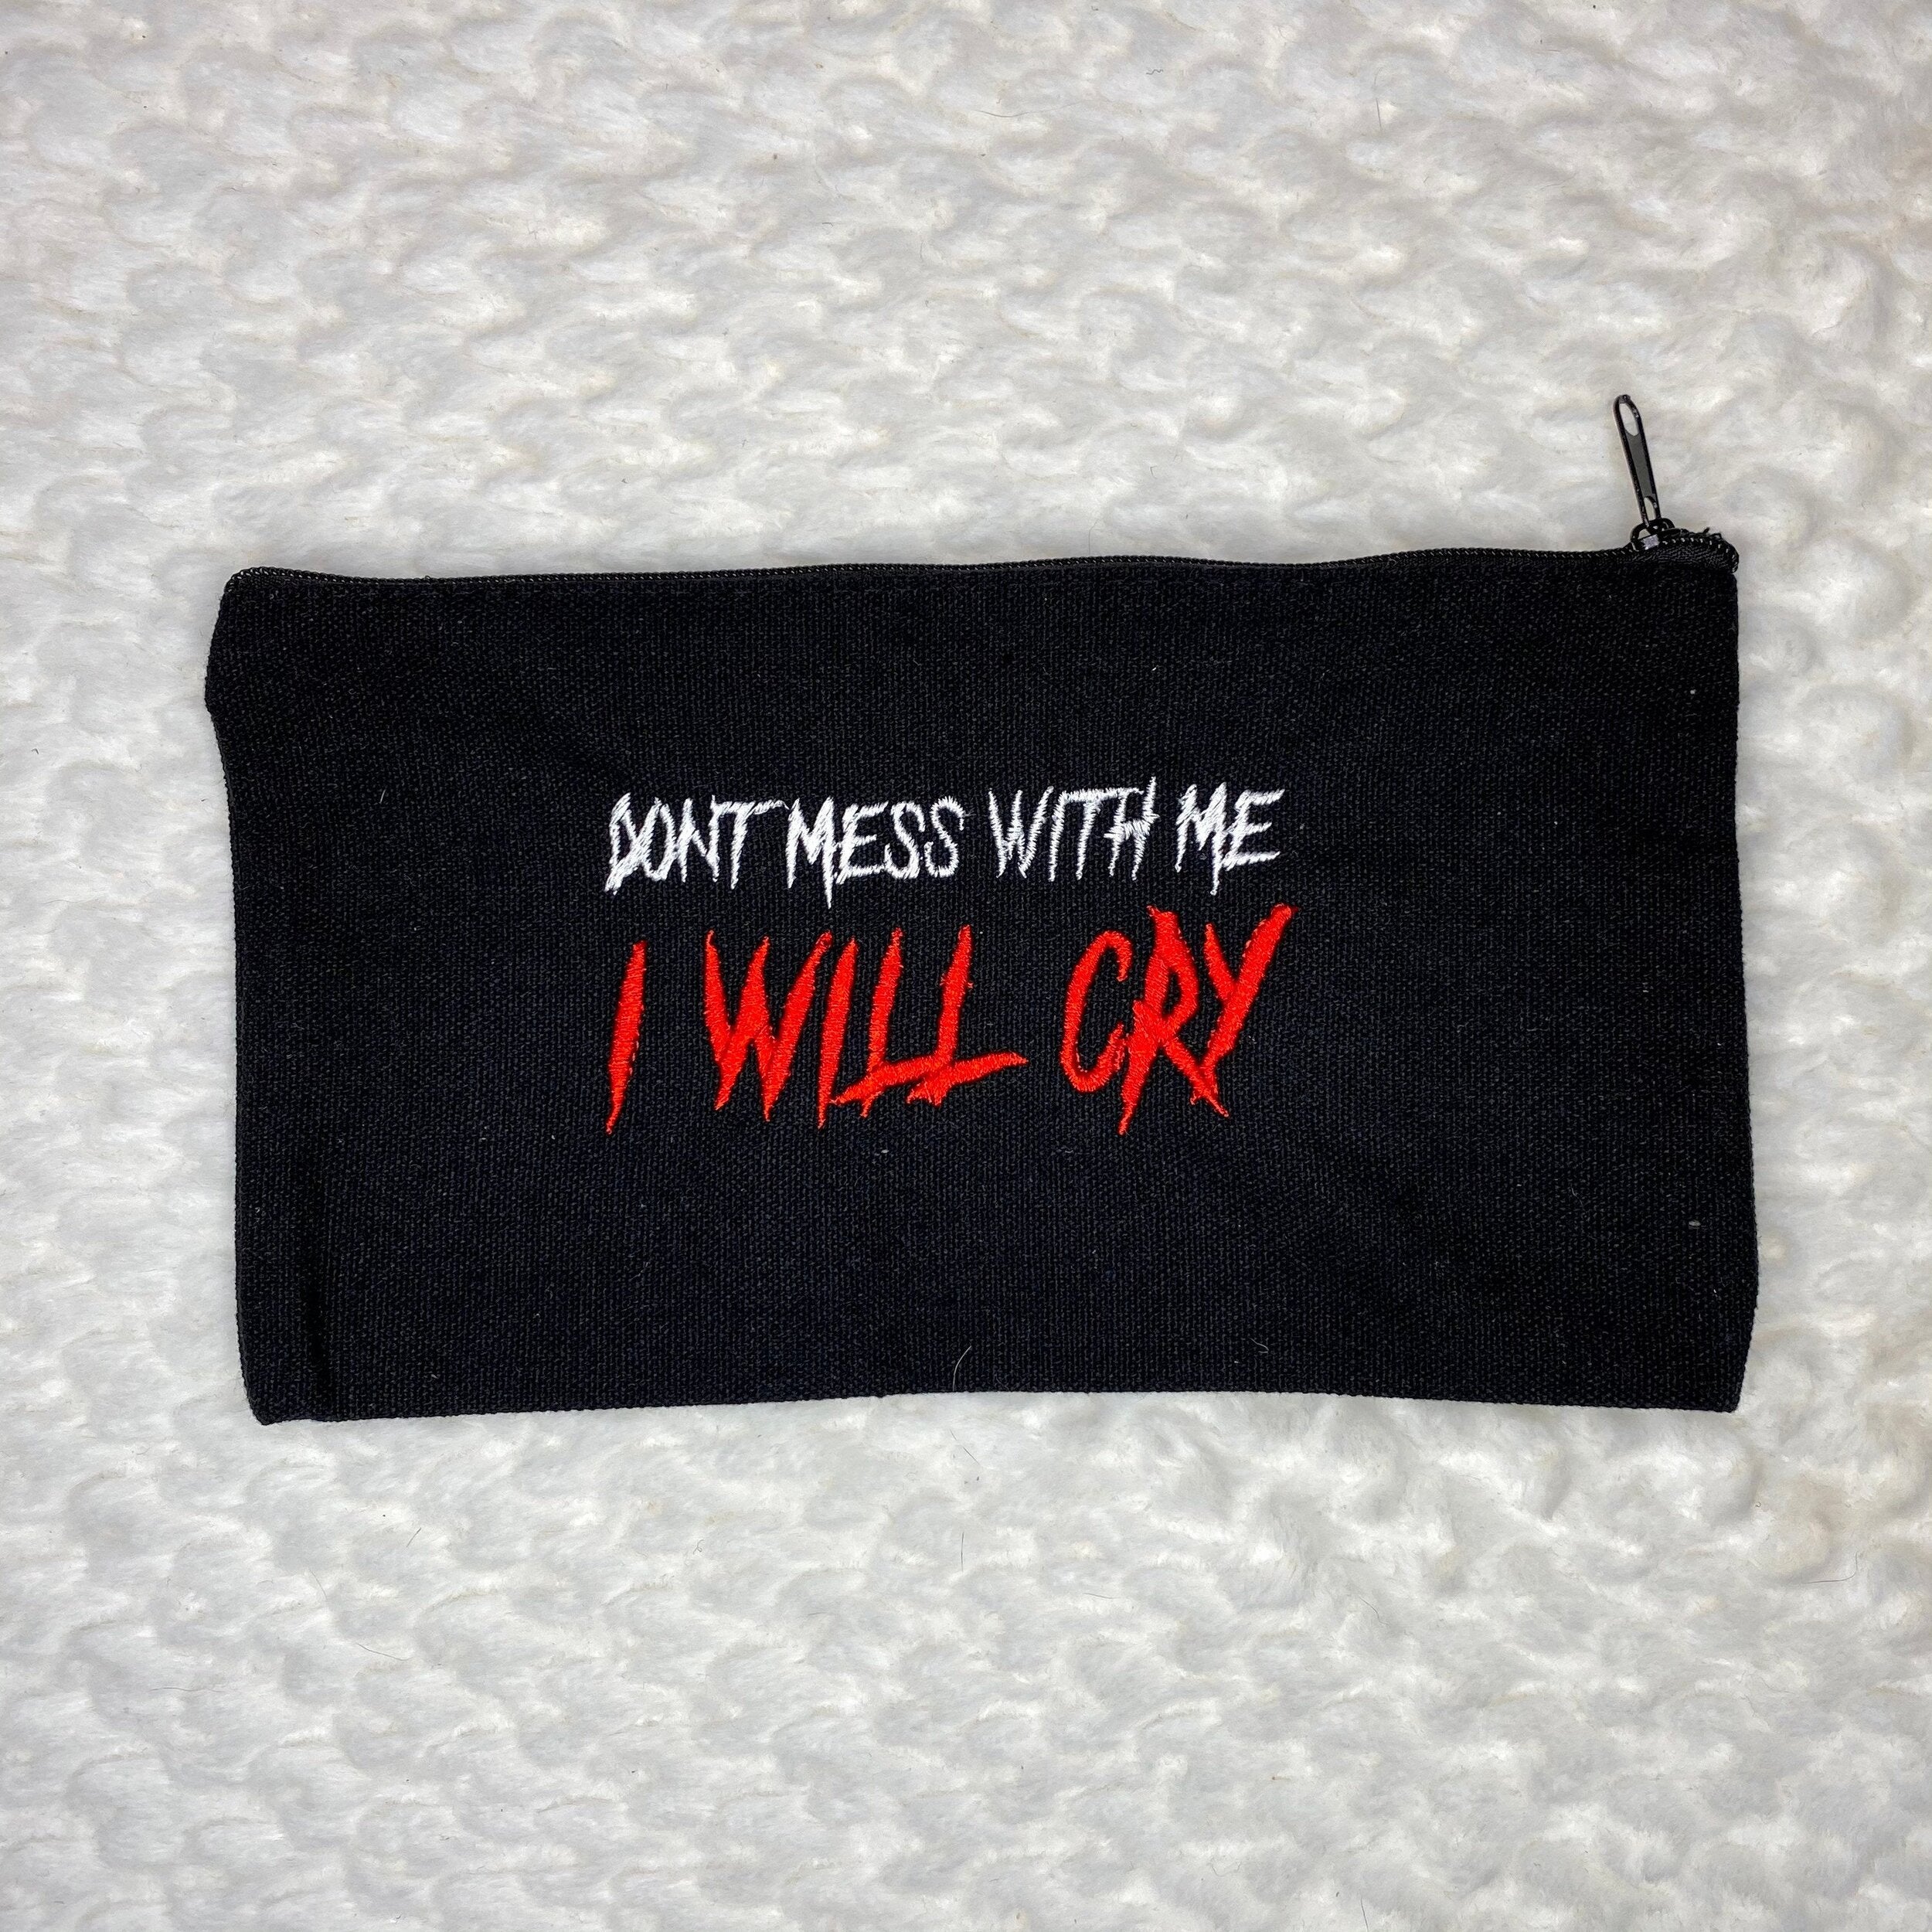 Don’t Mess With Me I Will Cry Bag - IncredibleGood Inc